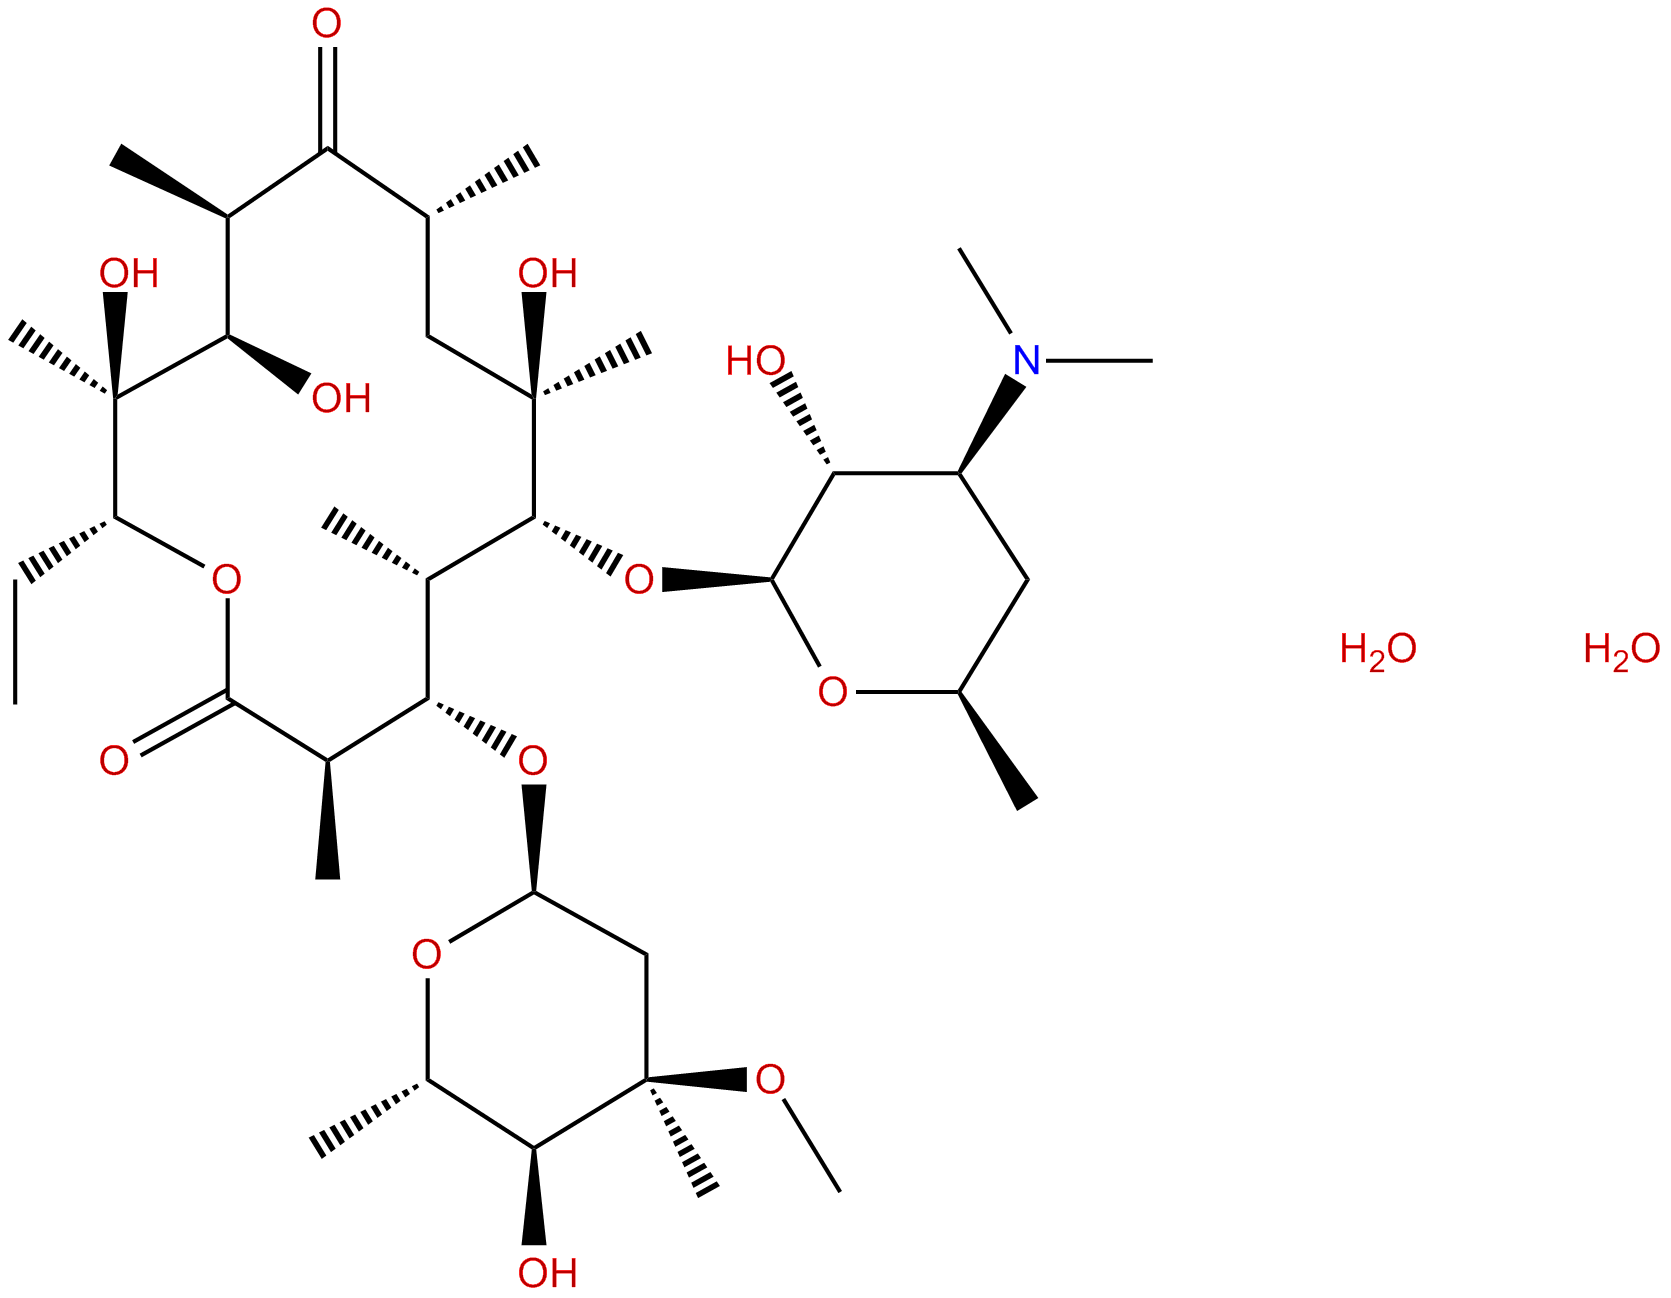 Image of erythromycin A dihydrate